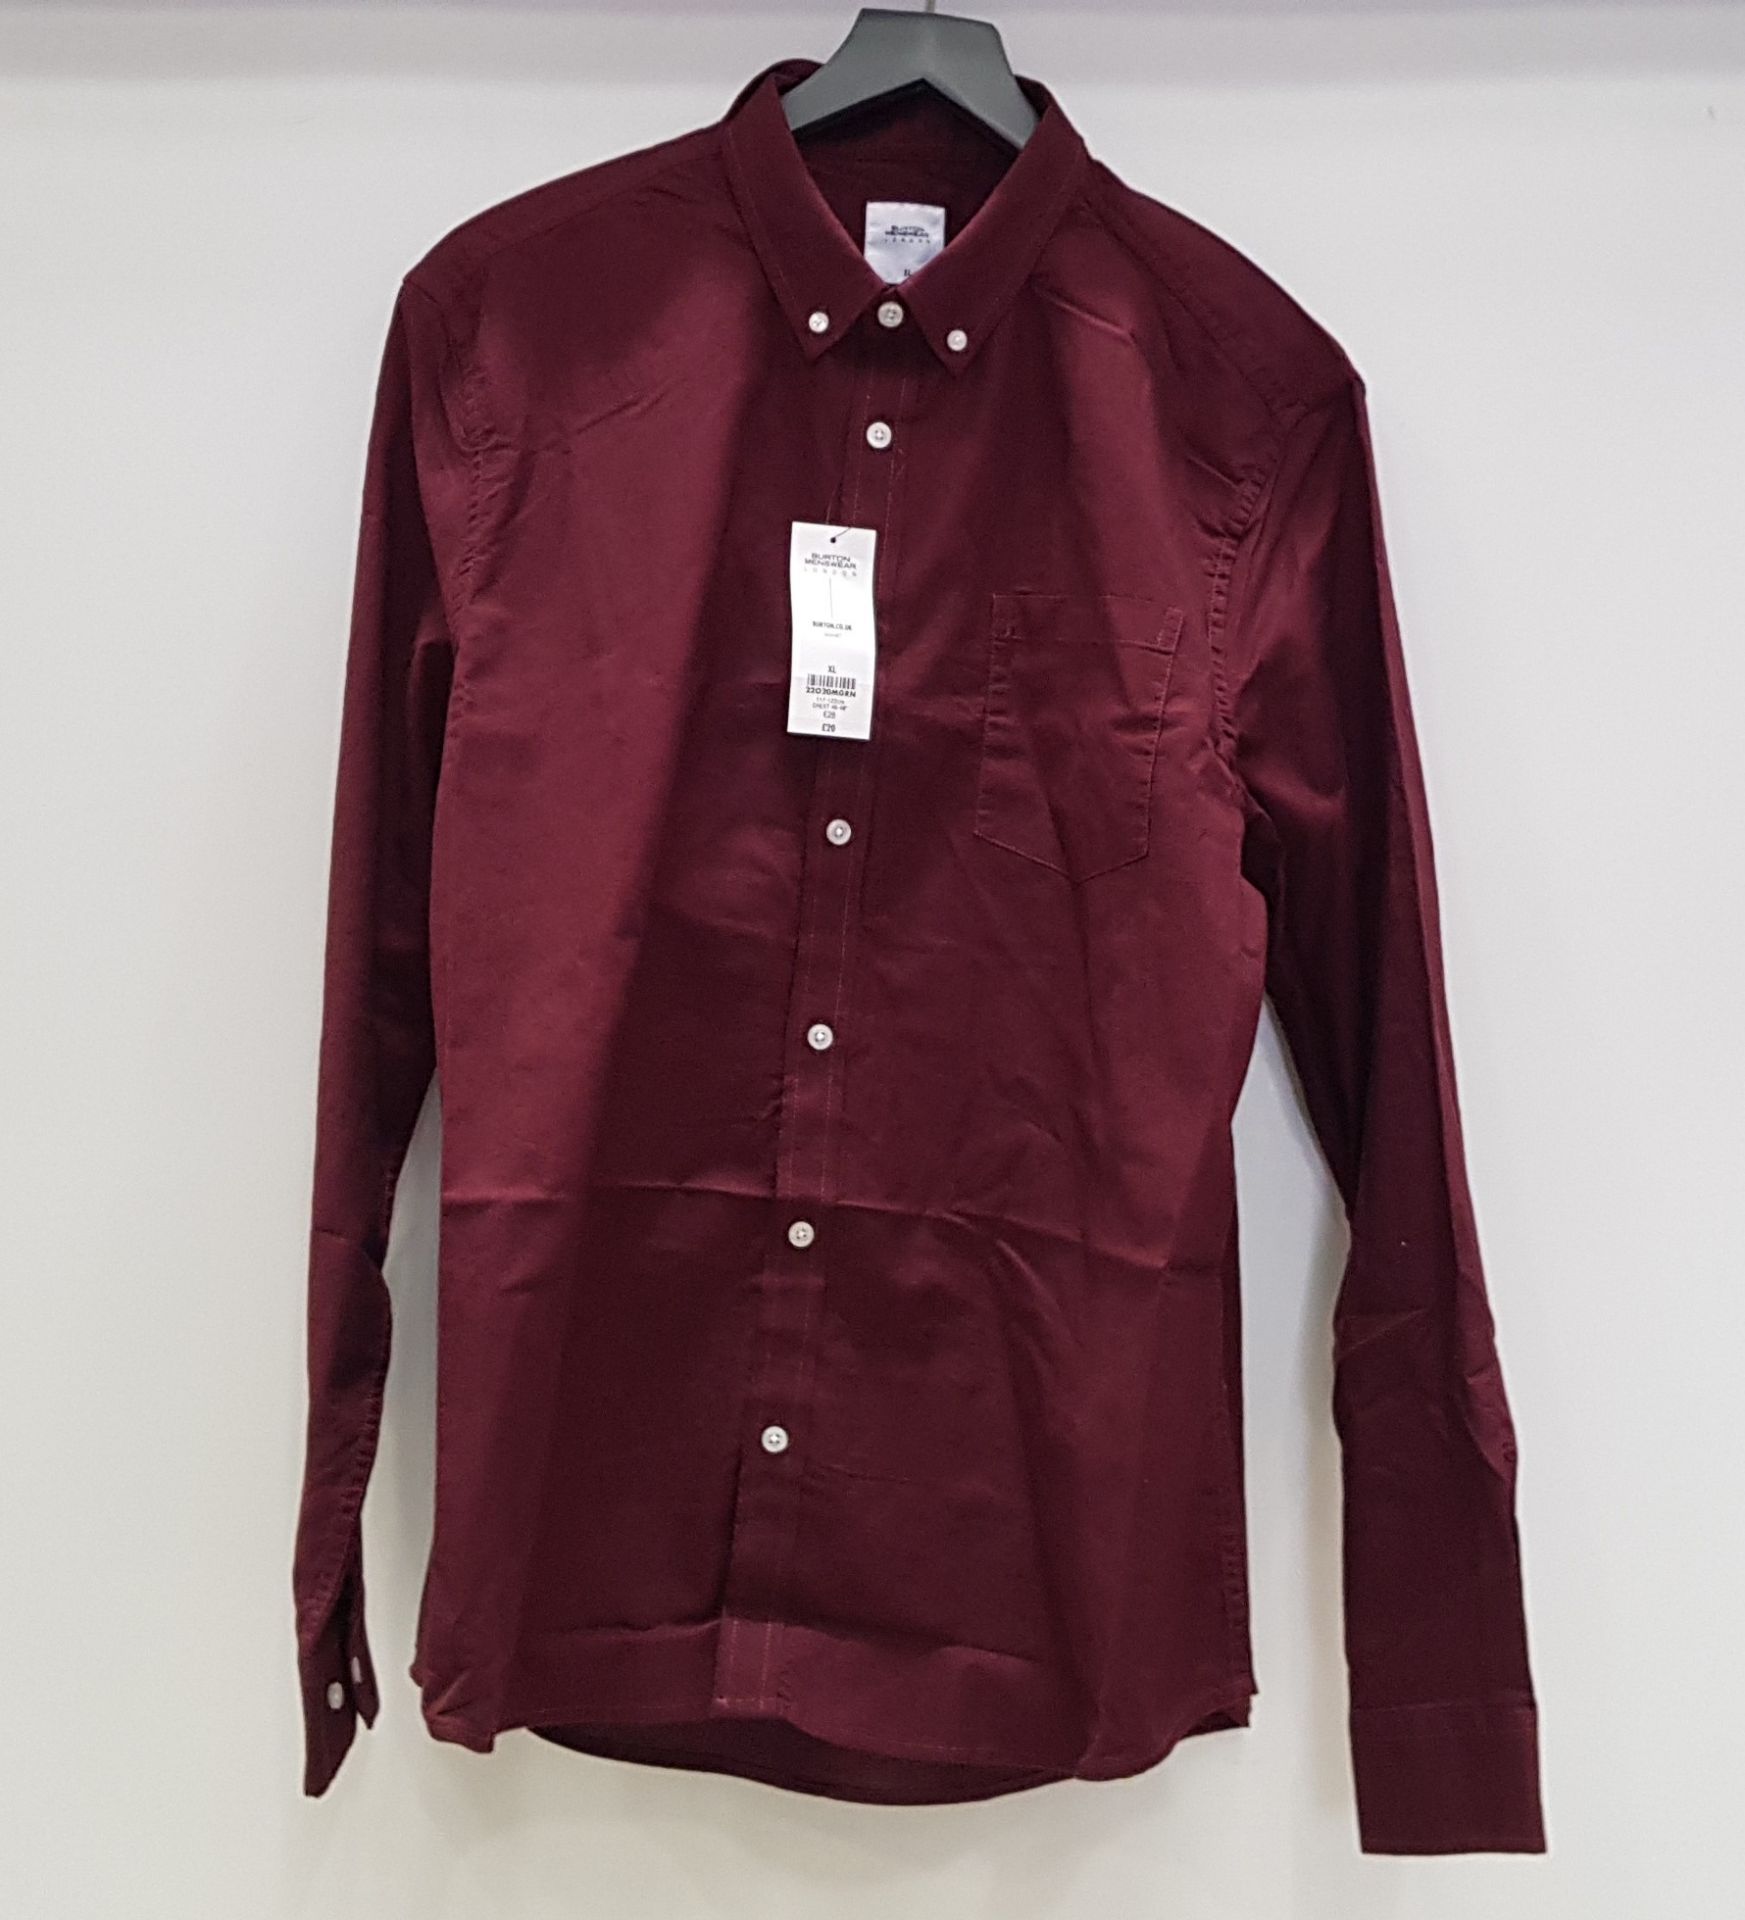 20 X BRAND NEW BURTON MENSWEAR MAROON LONG SLEEVED BUTTONED SHIRTS SIZE LARGE RRP £20.00 (TOTAL